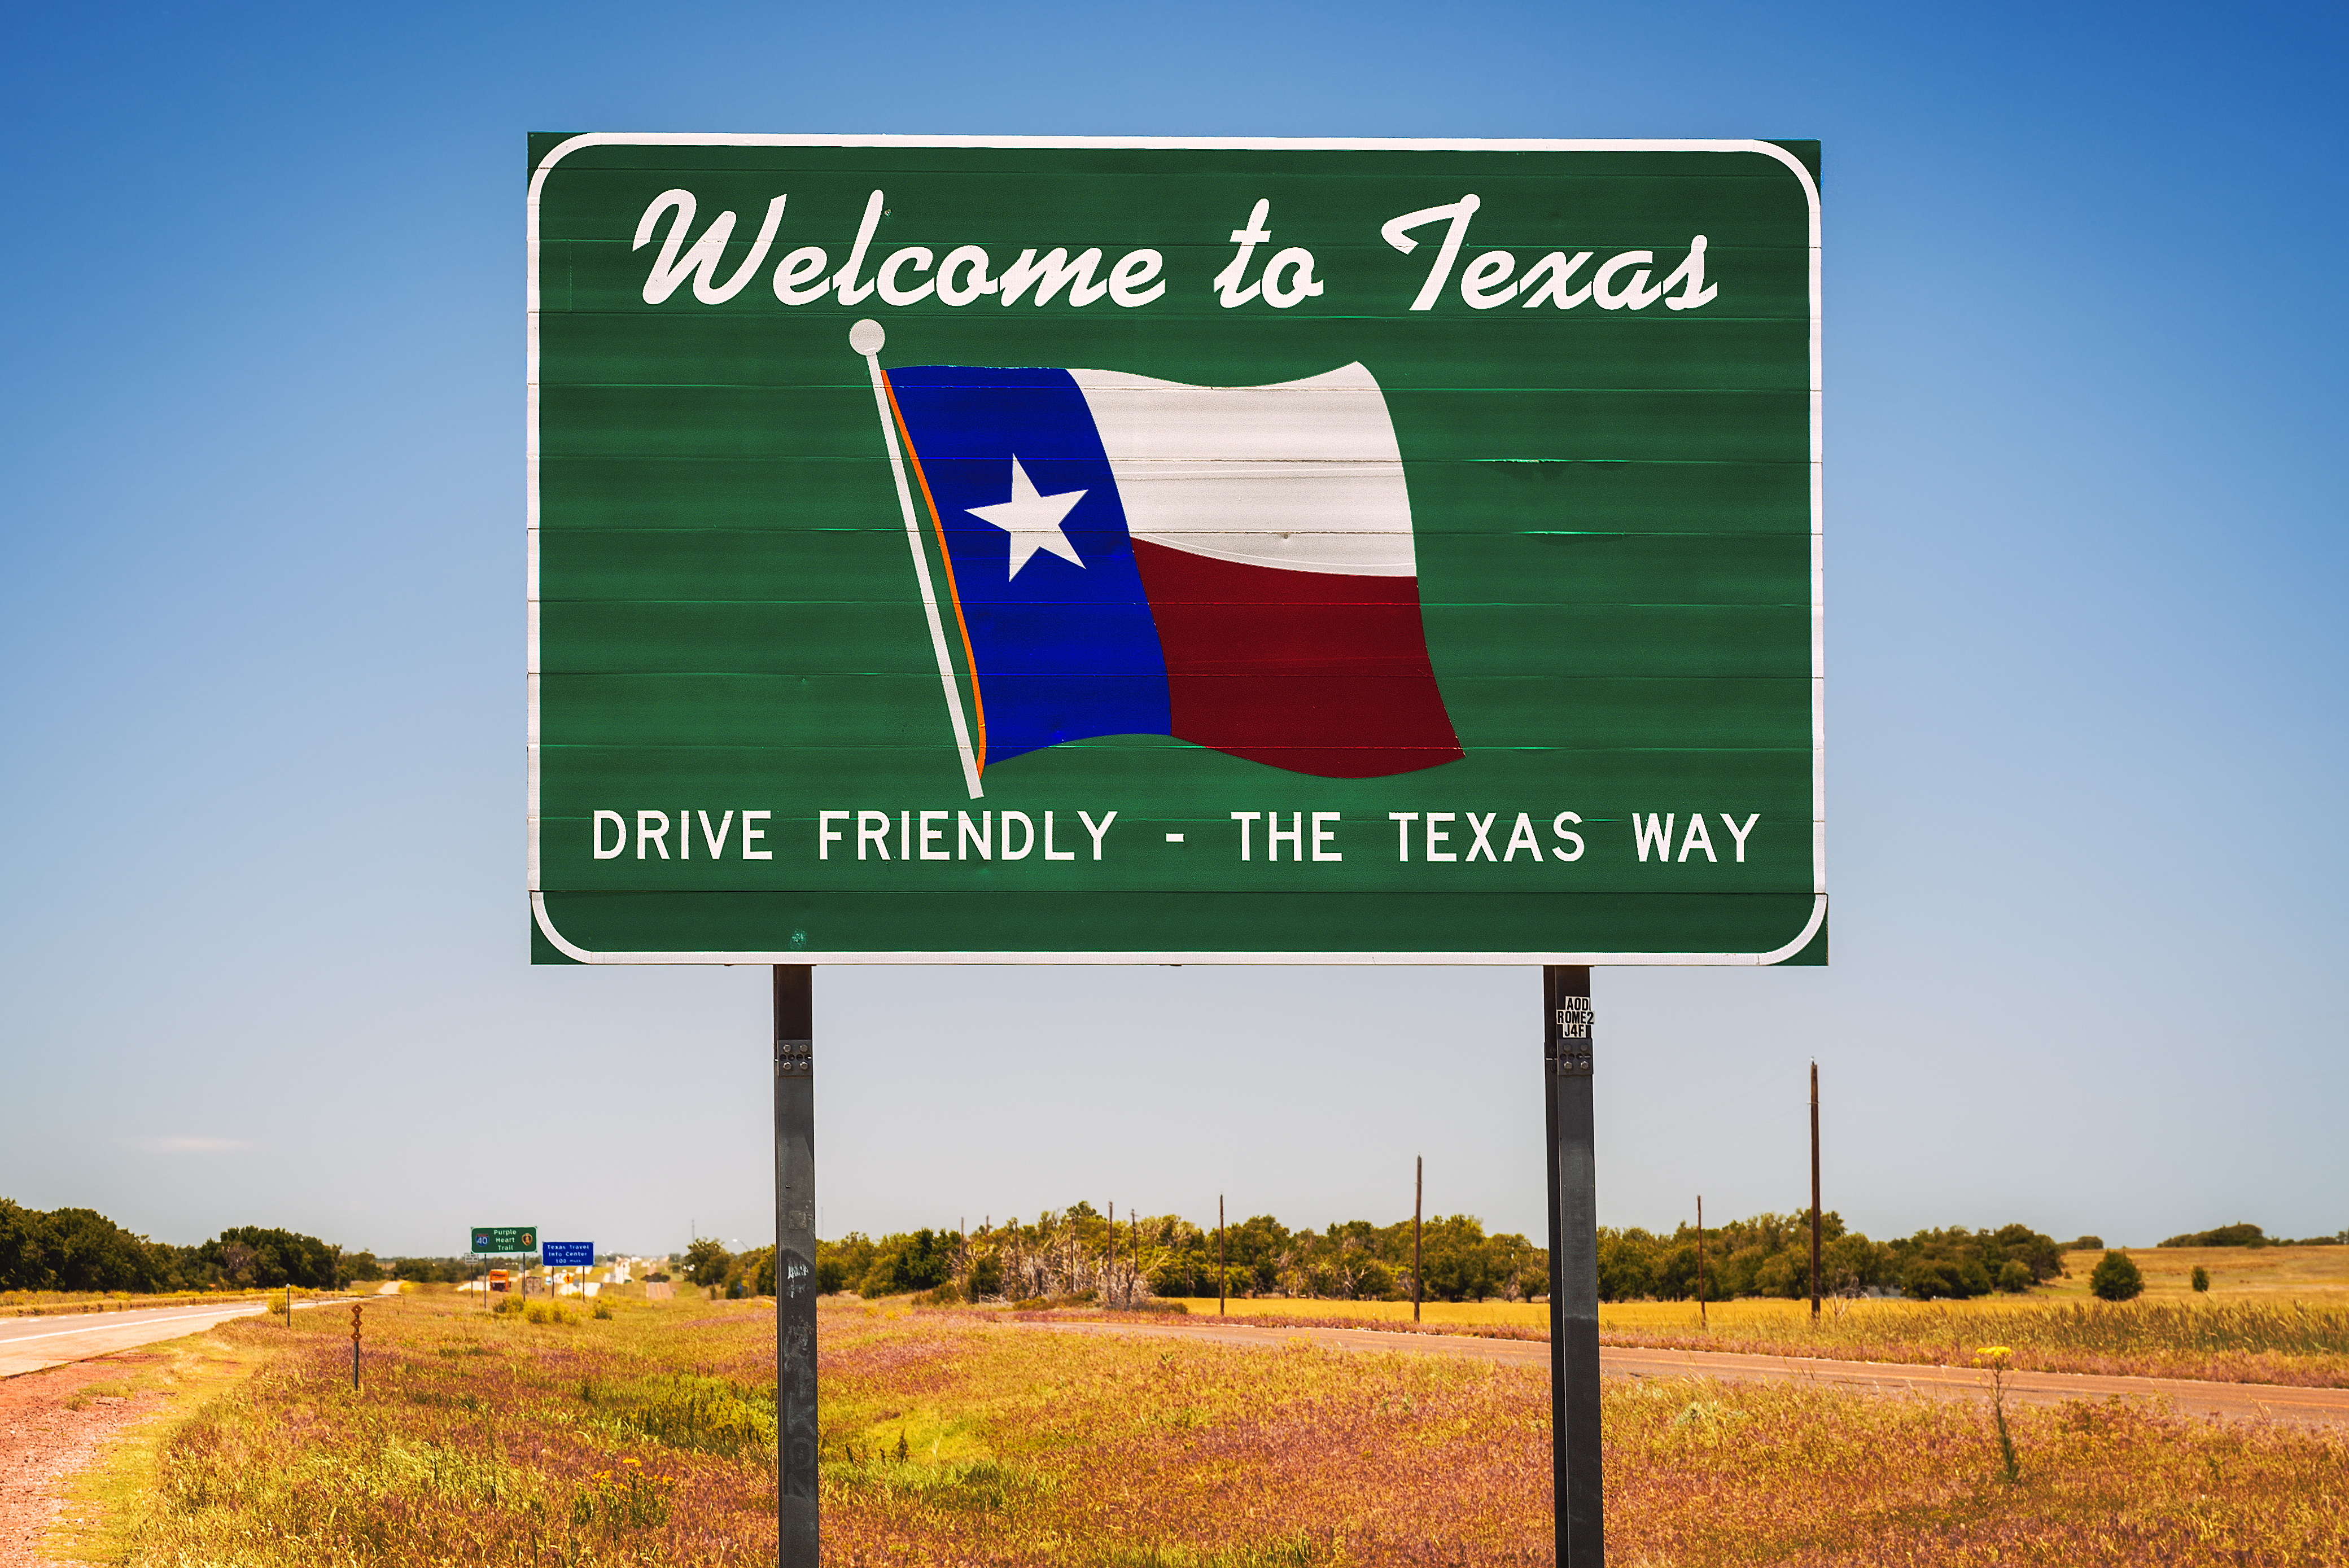 Texas sign "Welcome to Texas"